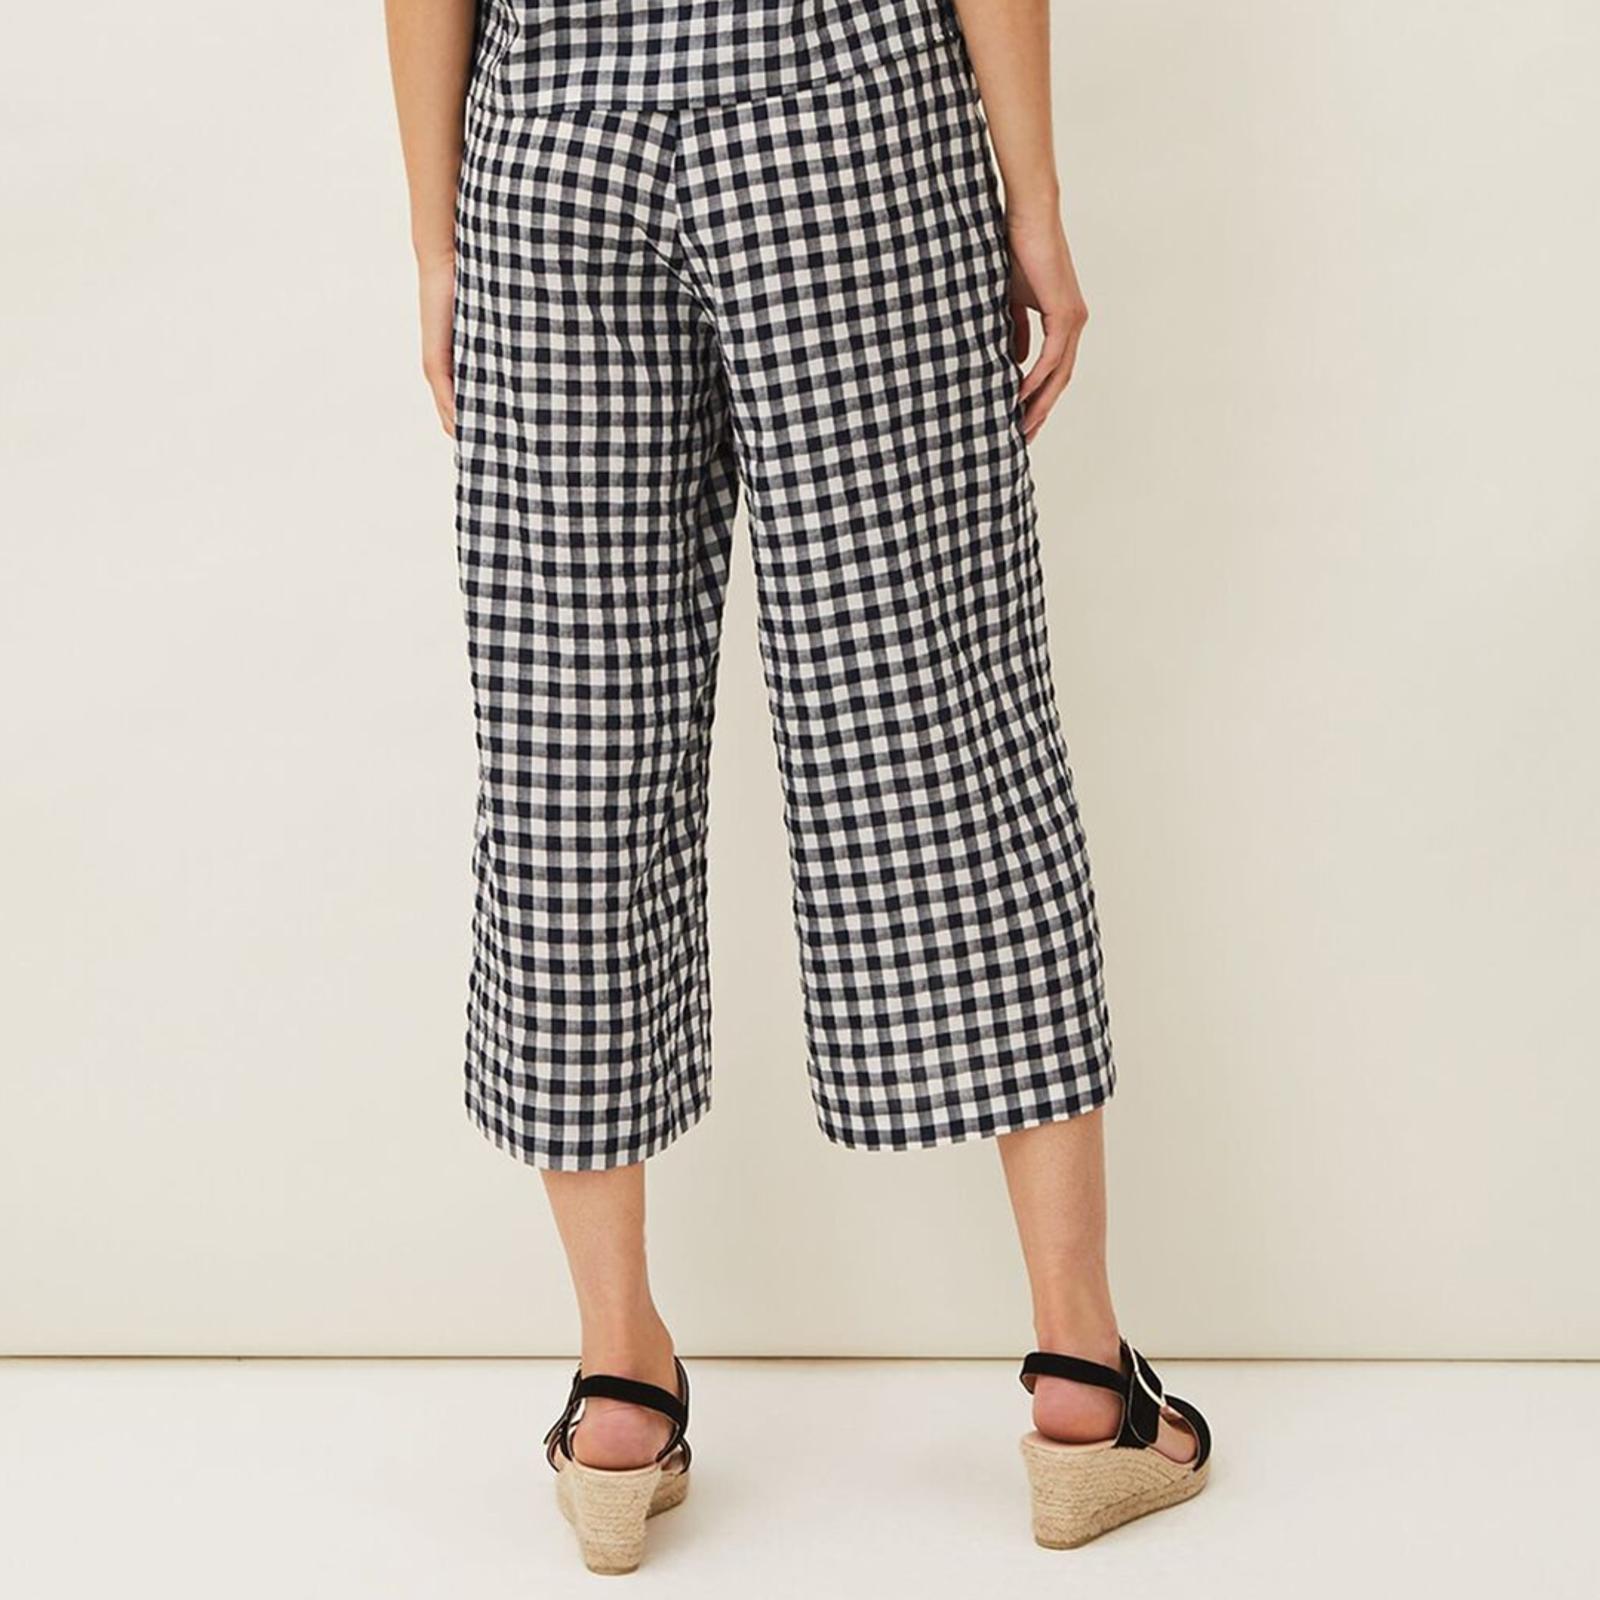 Navy Clea Gingham Culottes - BrandAlley